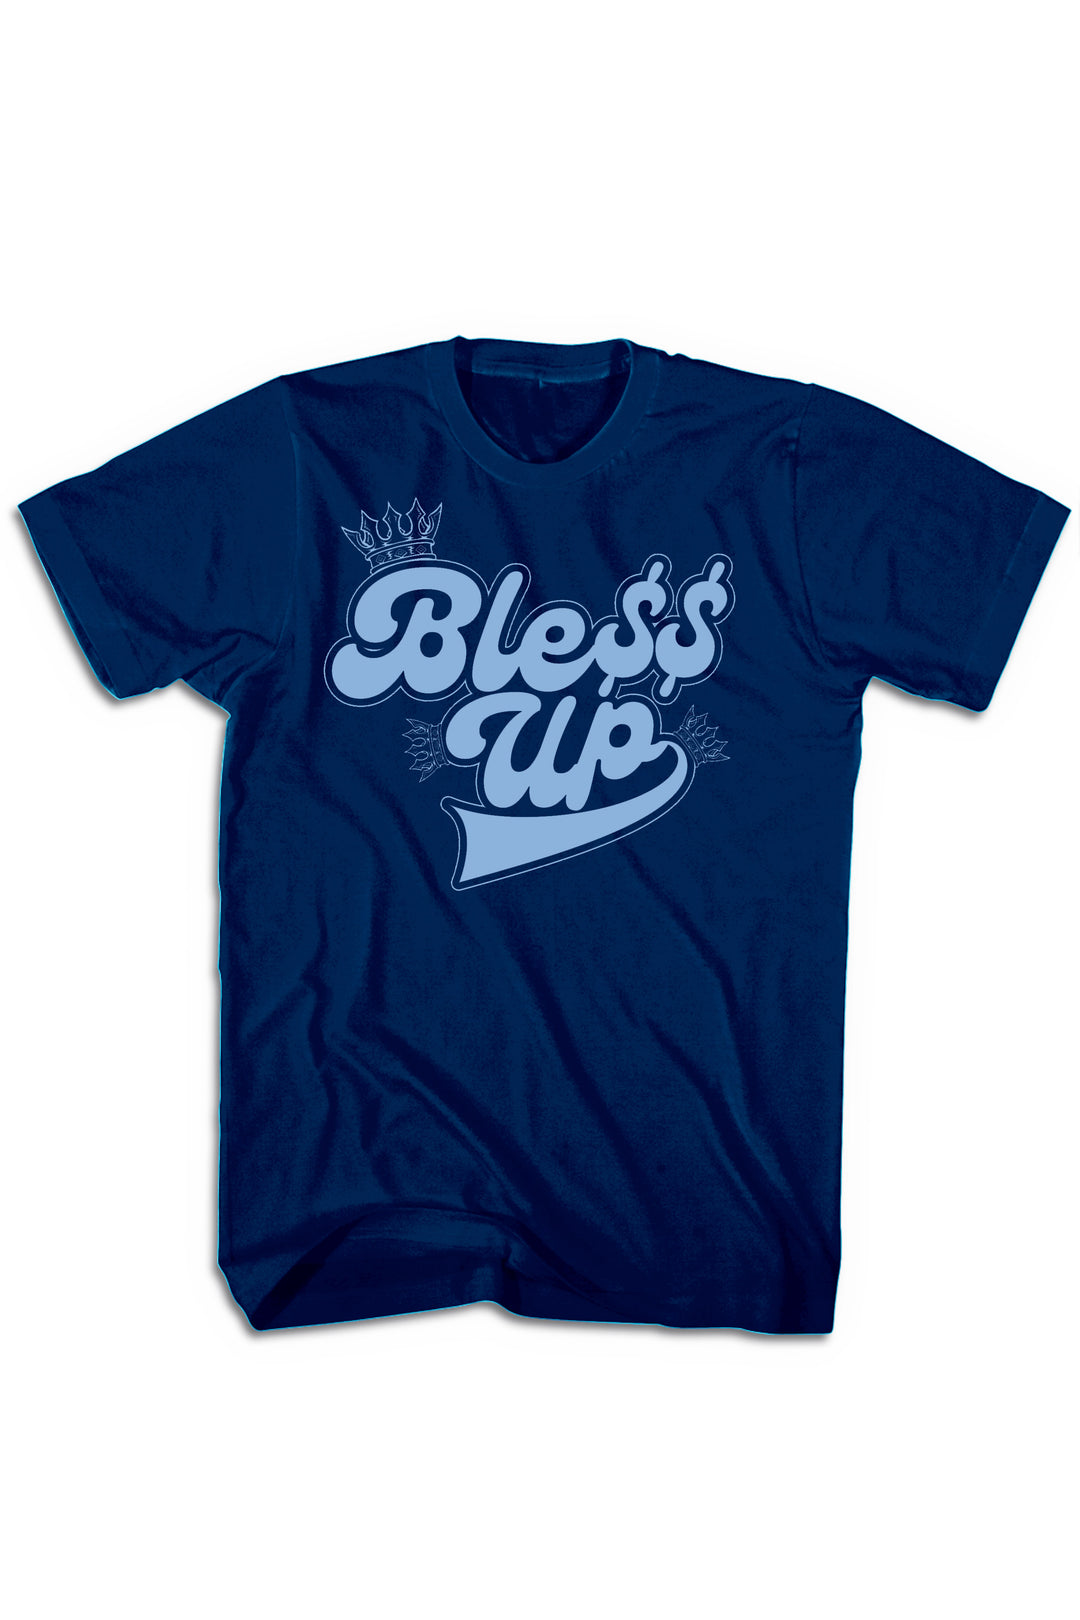 Bless Up Crowns Tee (Blue Logo) - Zamage